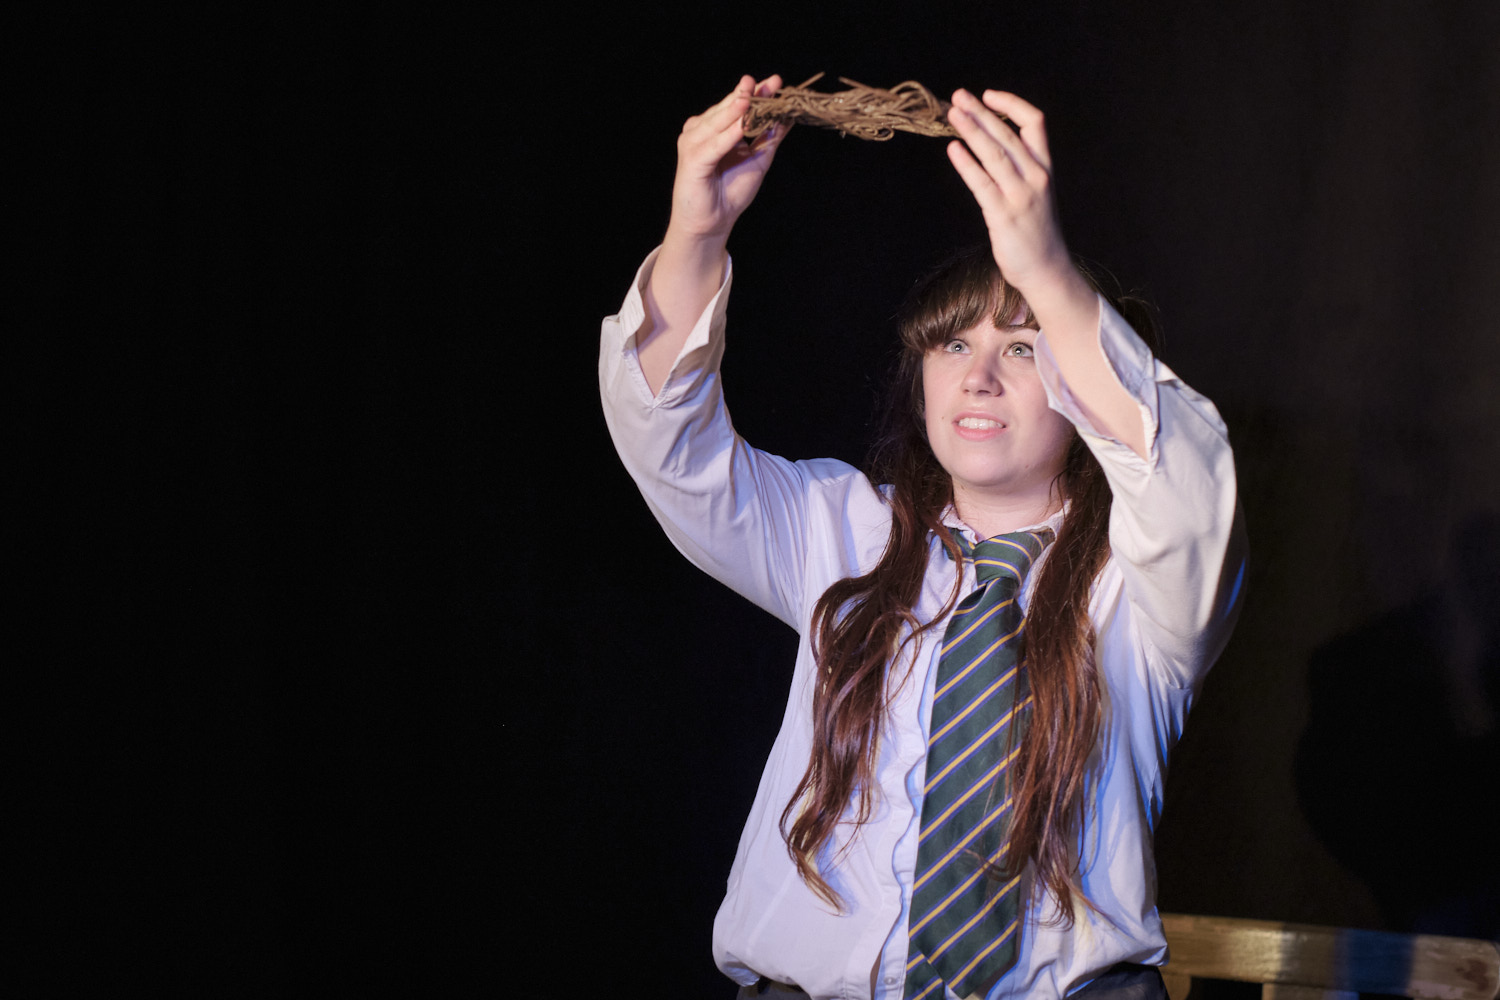 A girl in school uniform raises a crown of thorns. Image from 'The True Story Of The Little Girl Who Thought She Was The Second Coming Of Jesus Christ'